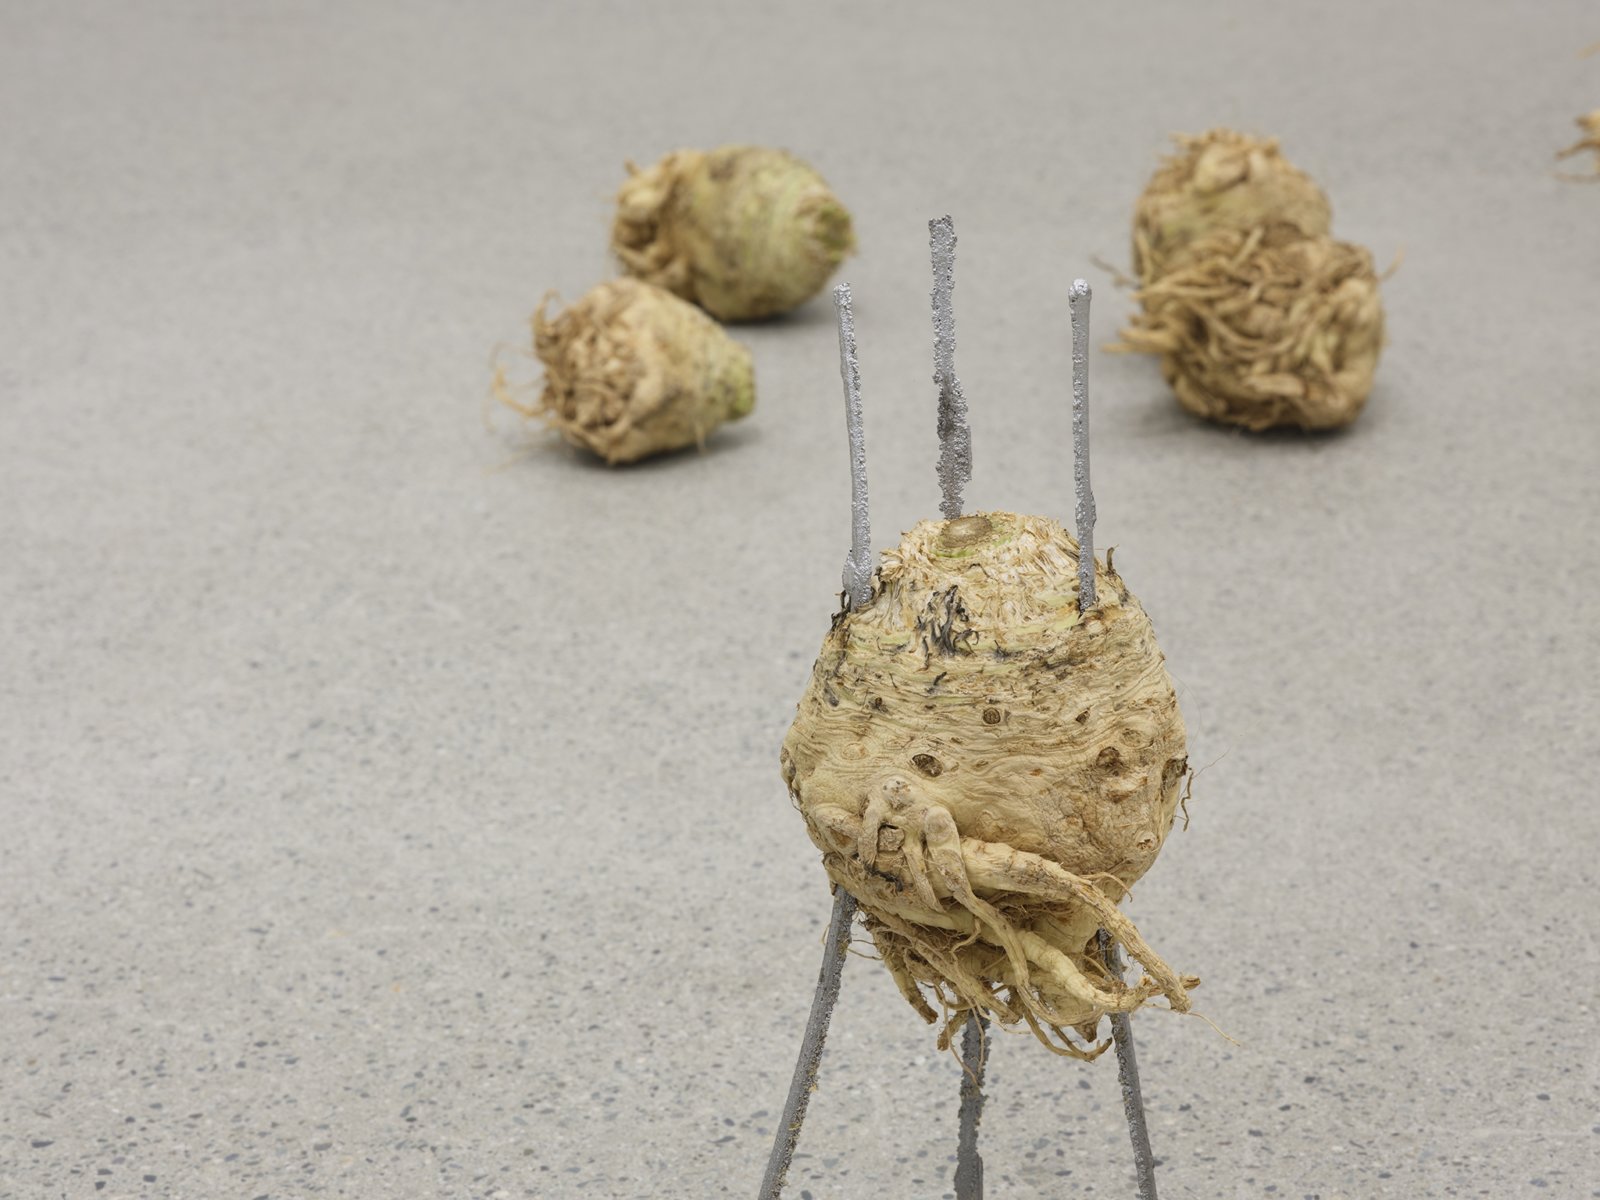 ​Rochelle Goldberg, Cosmic Footing (detail), 2019, celeriac, ginger, cast aluminum matches, cast bronze matches, installation dimensions variable by Rochelle Goldberg